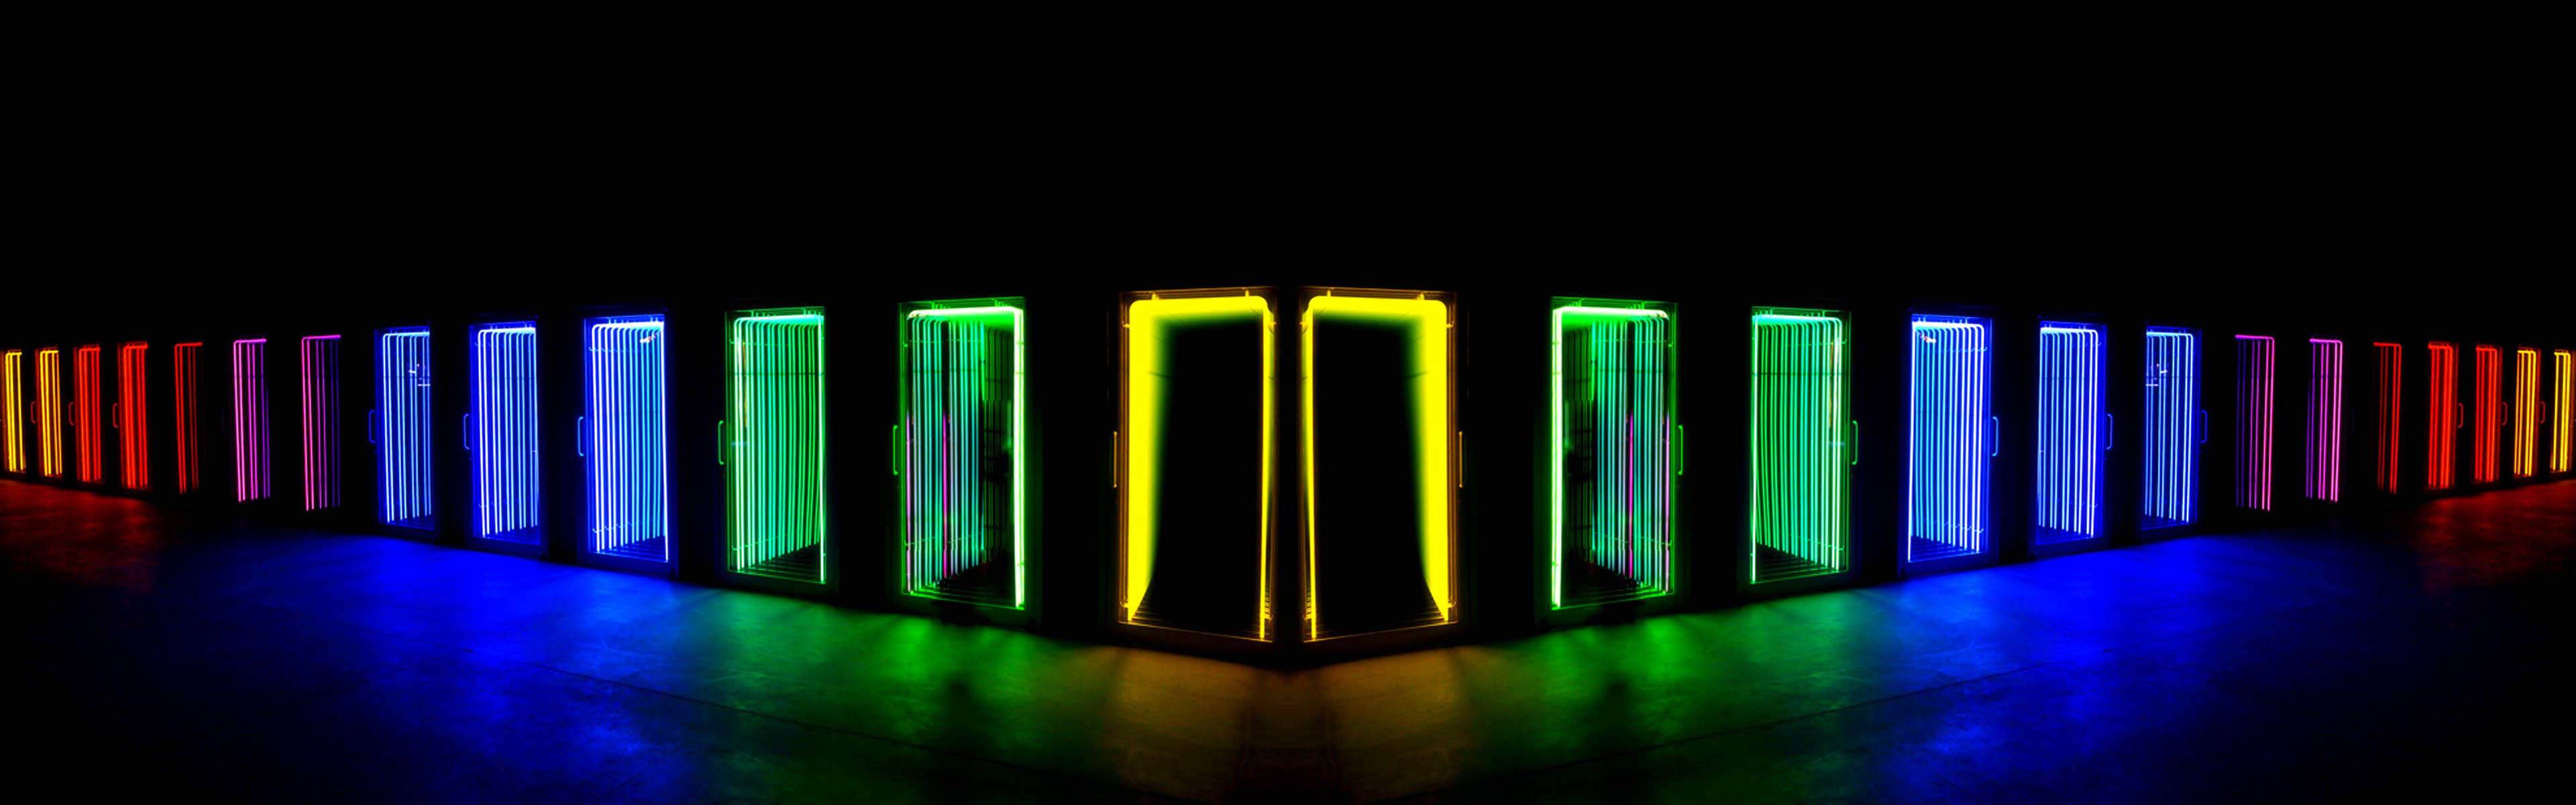 High Resolution Dual Monitor Neon Doors Background